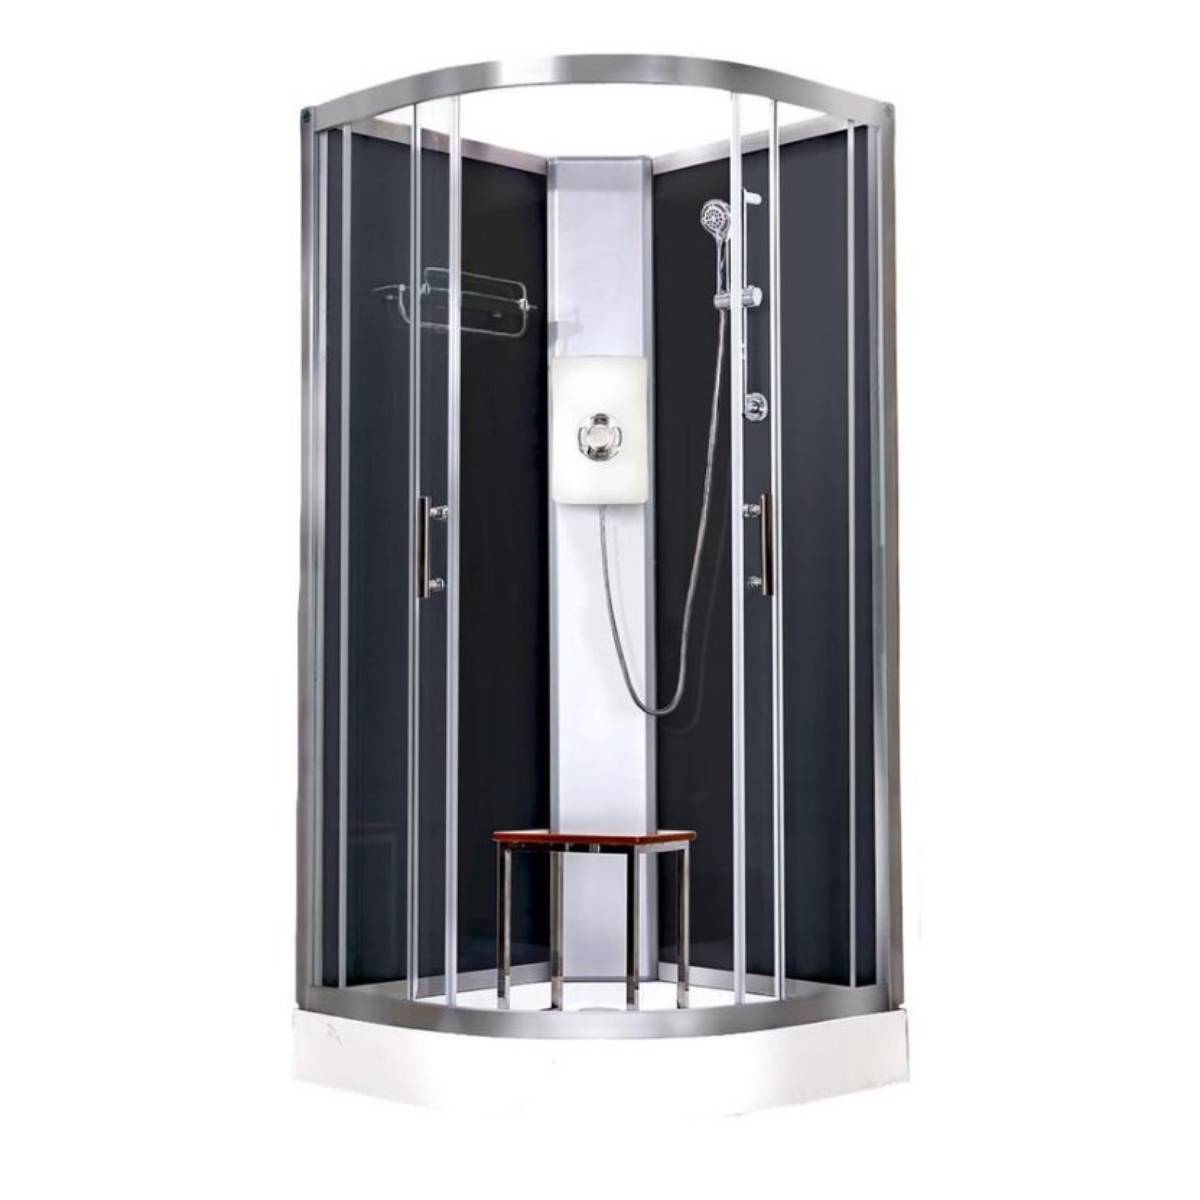 Vidalux Pure Electric 800mm Shower Cabin Black - Lux White 9.5KW (11632)